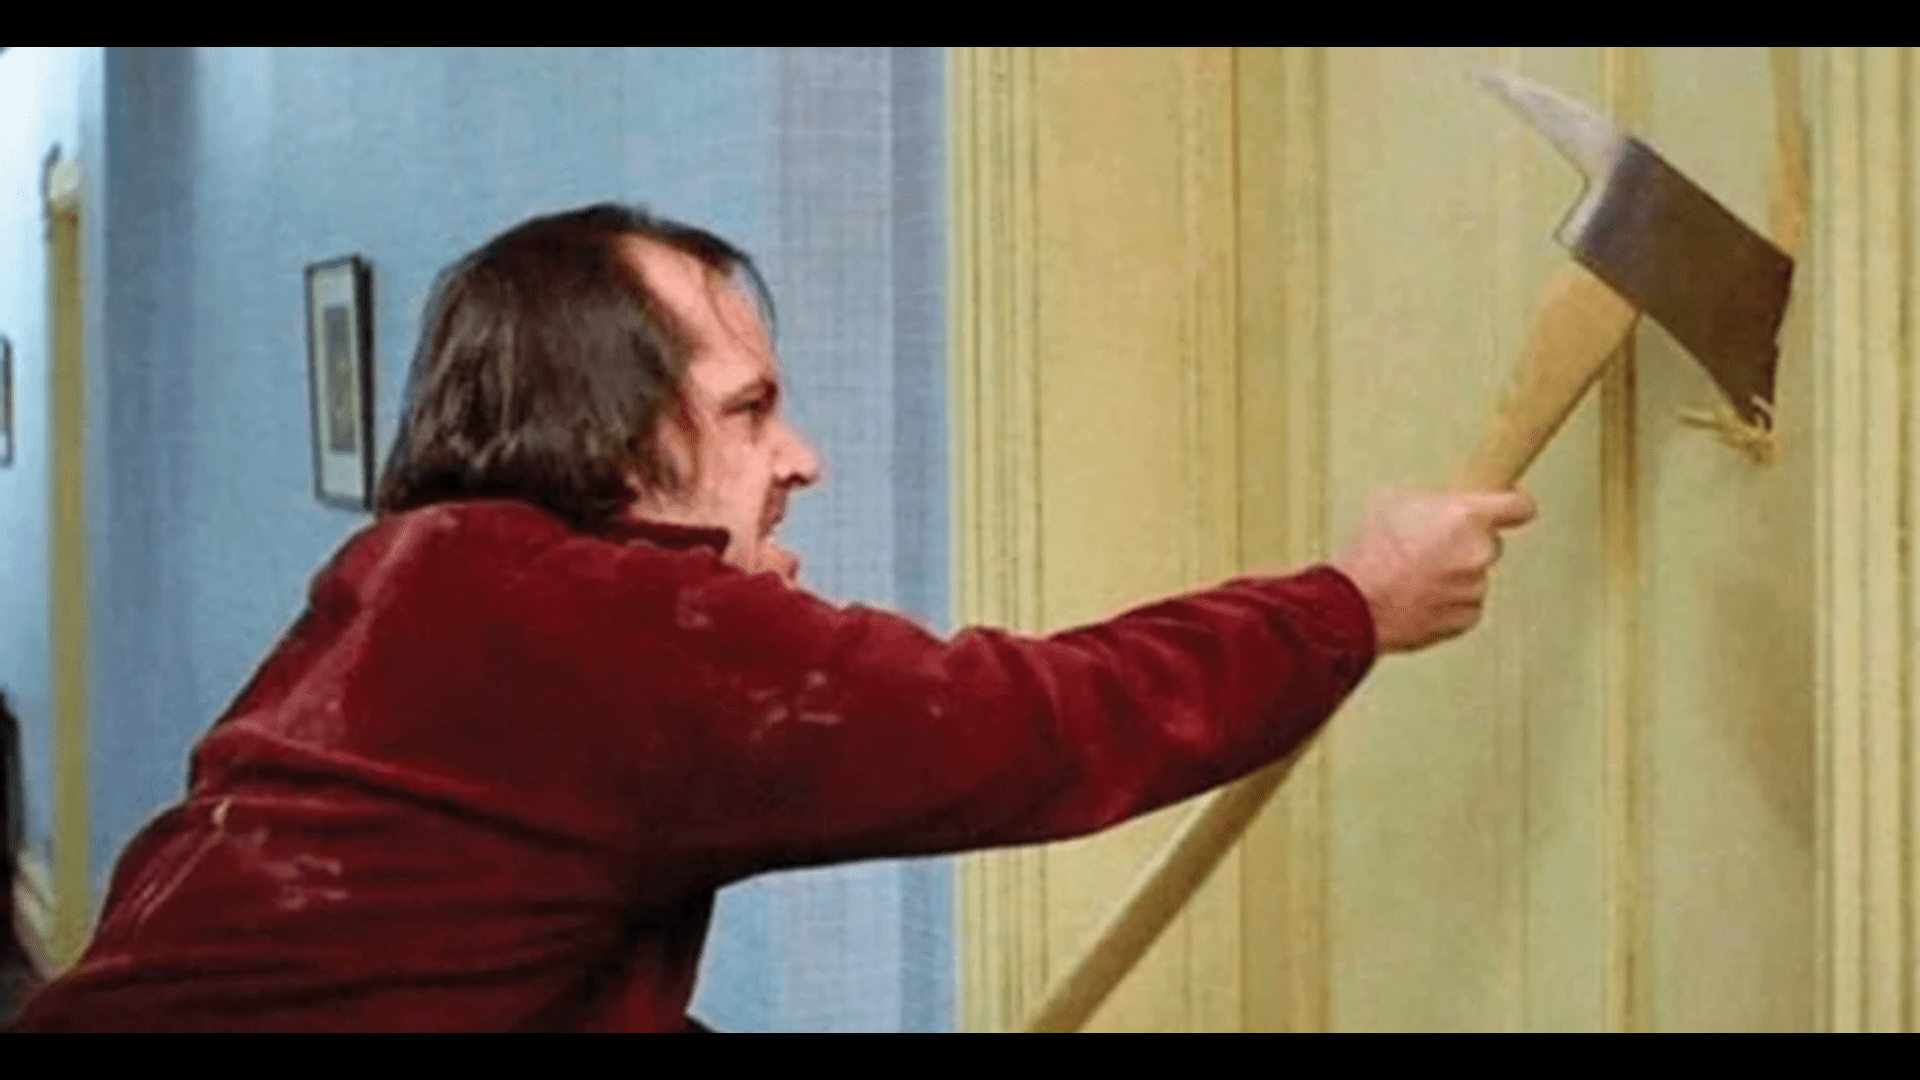 The ax from the movie "The Shining" will go under the hammer